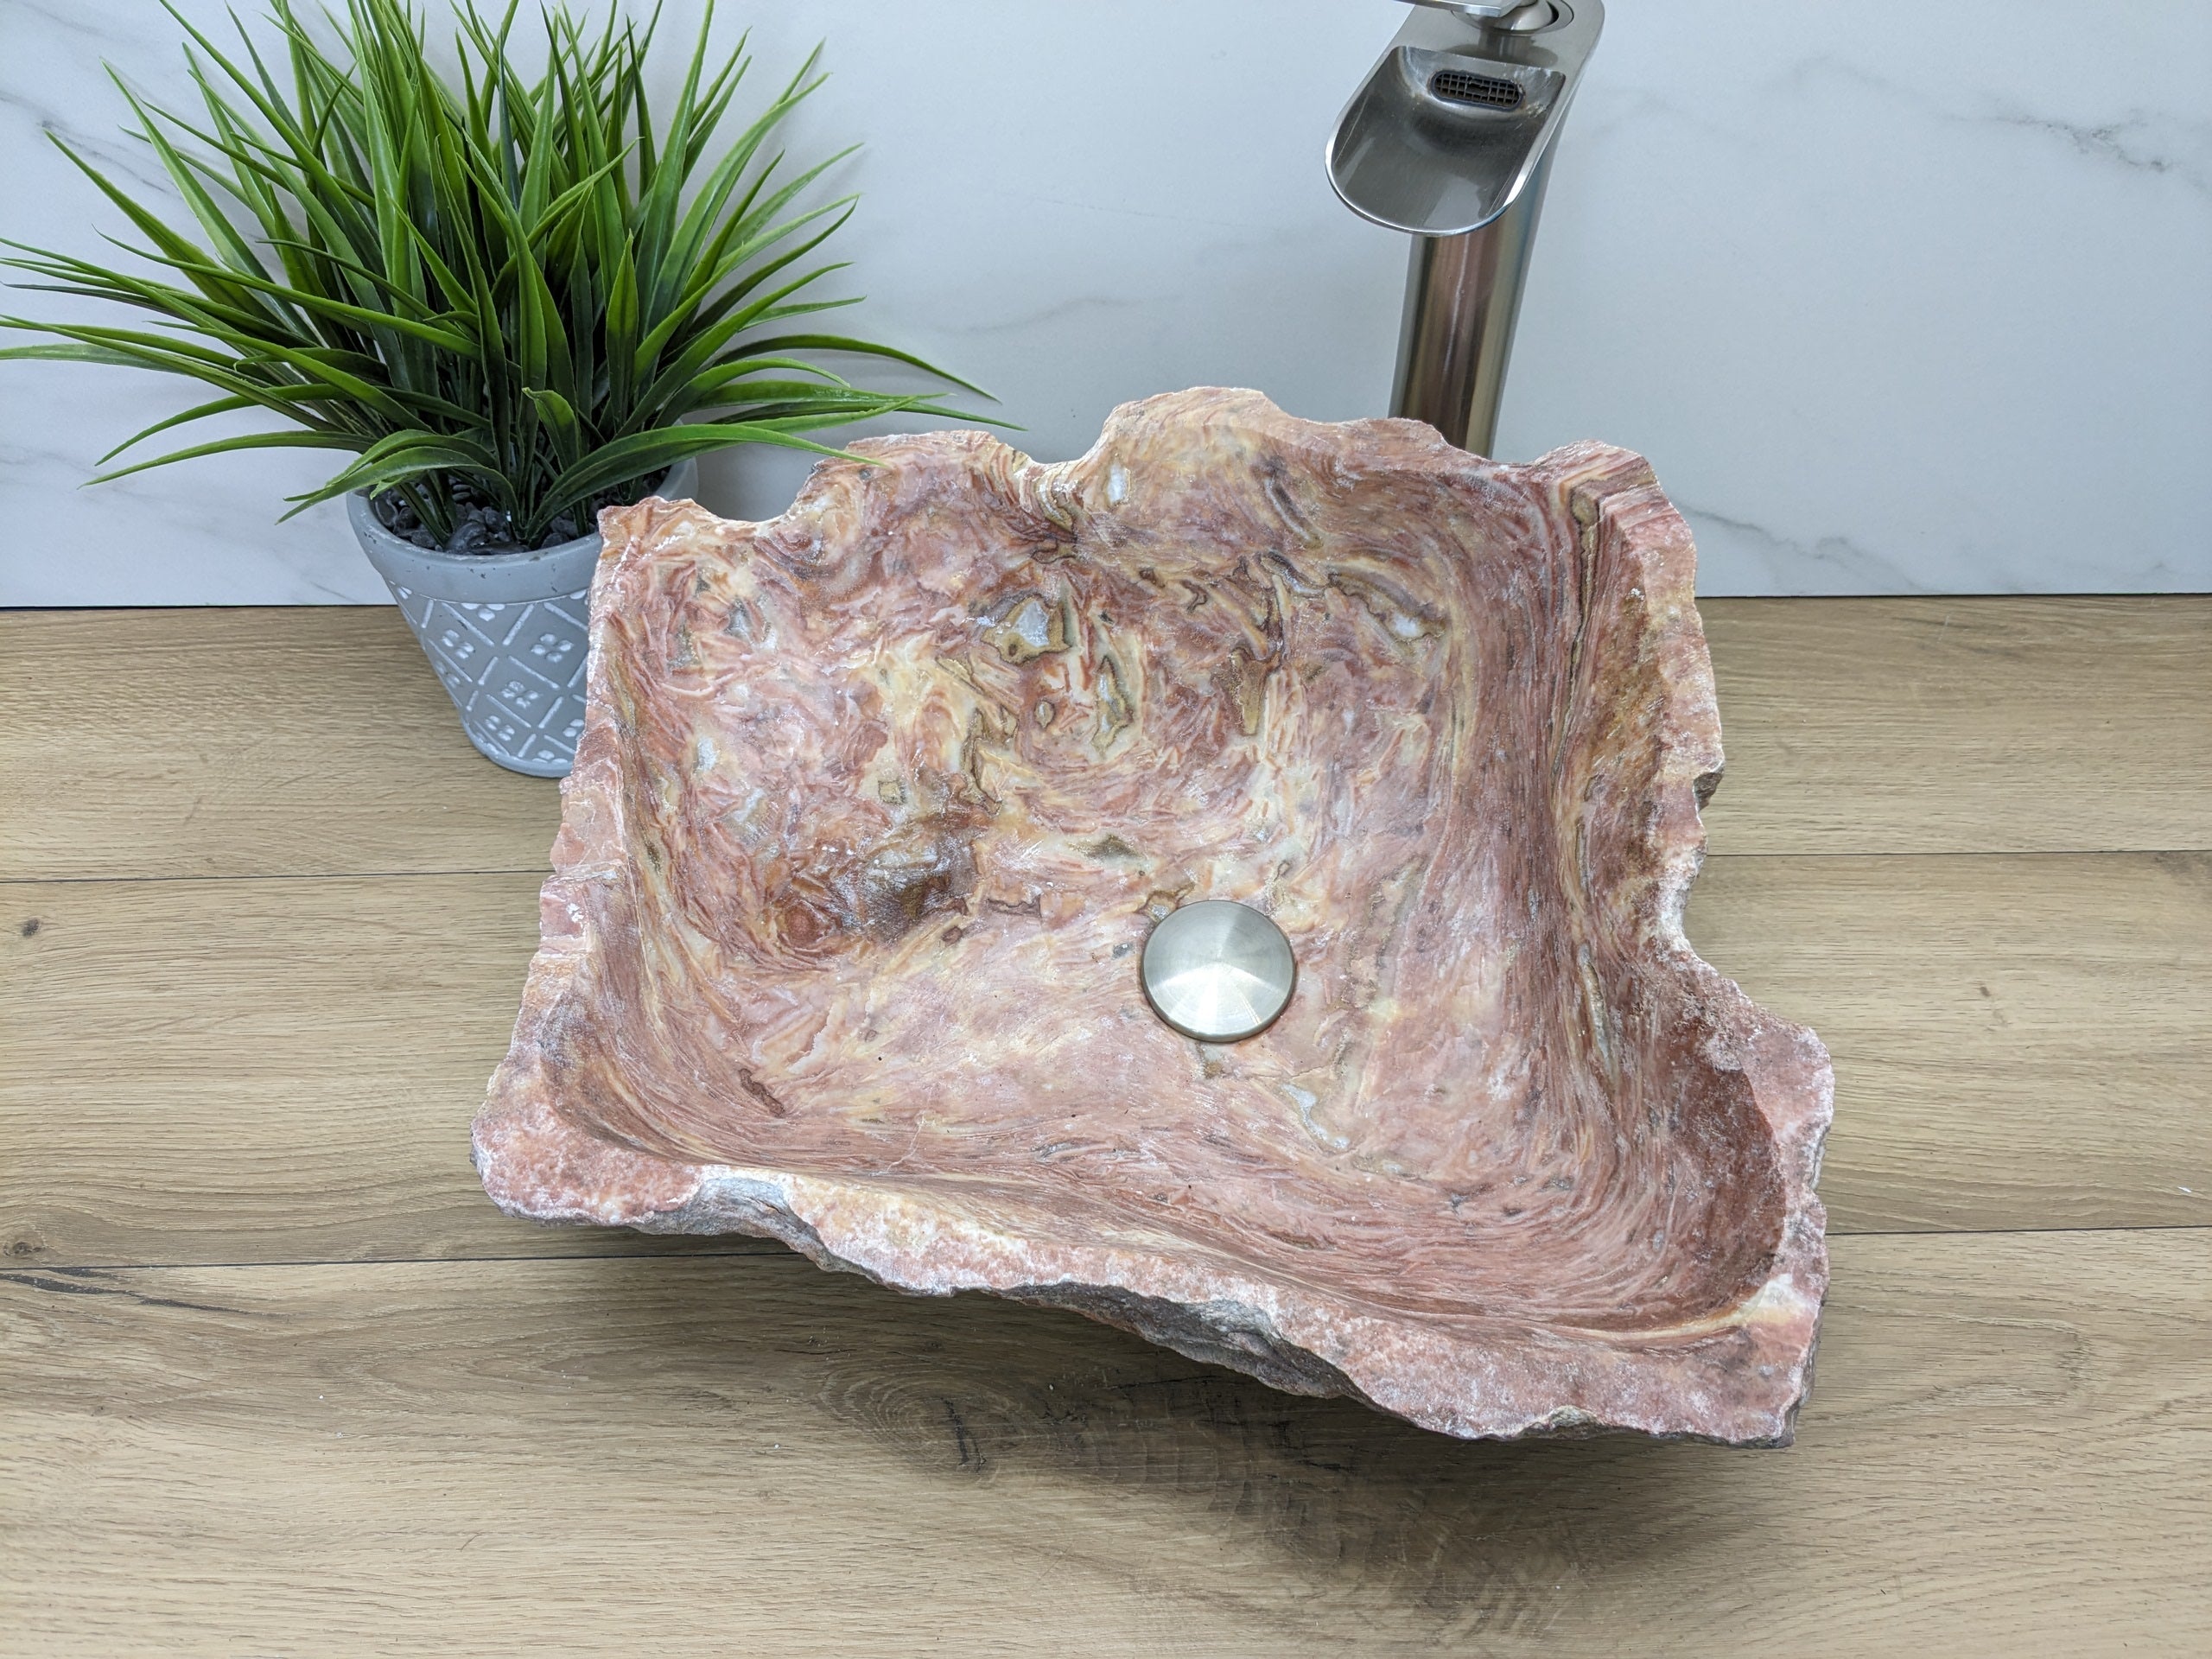 Pink and Tan Onyx Stone Vessel Sink. Custom Drain Size. Handmade in Mexico. We hand finish, package, and ship from the USA. Buy now at www.felipeandgrace.com. 